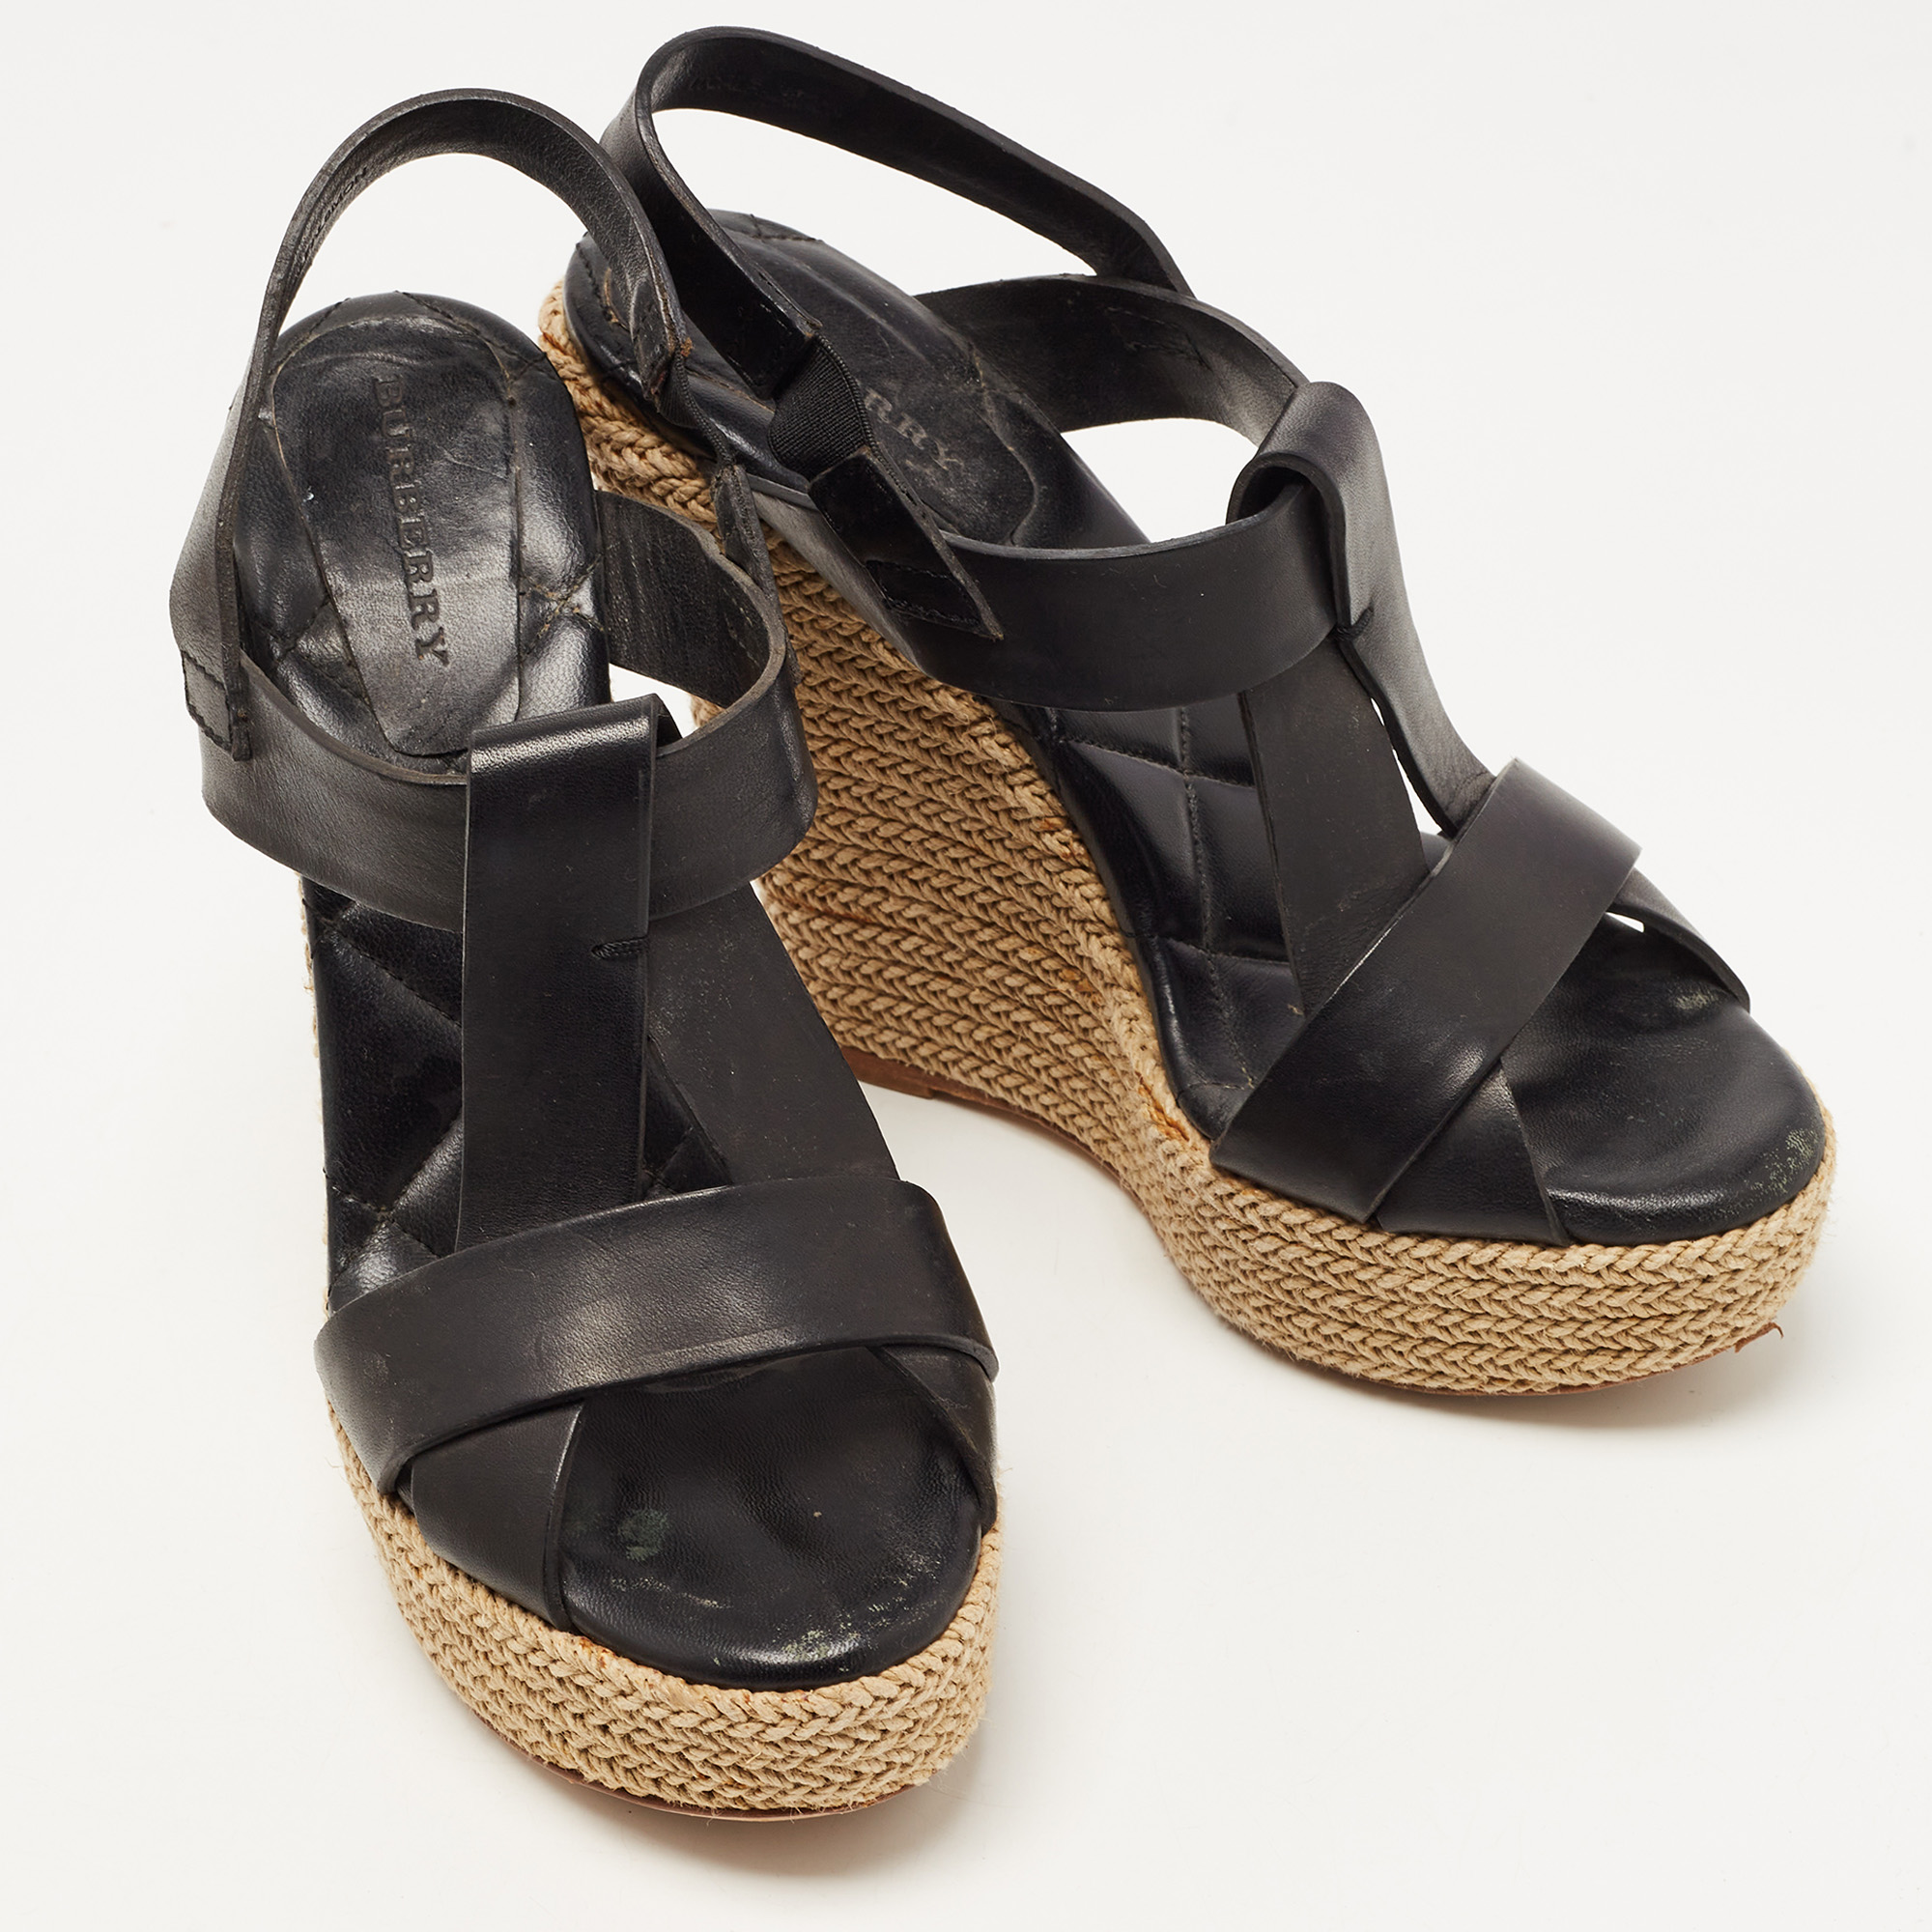 Burberry Black Leather Espadrille Wedge Strappy Sandals Size 39